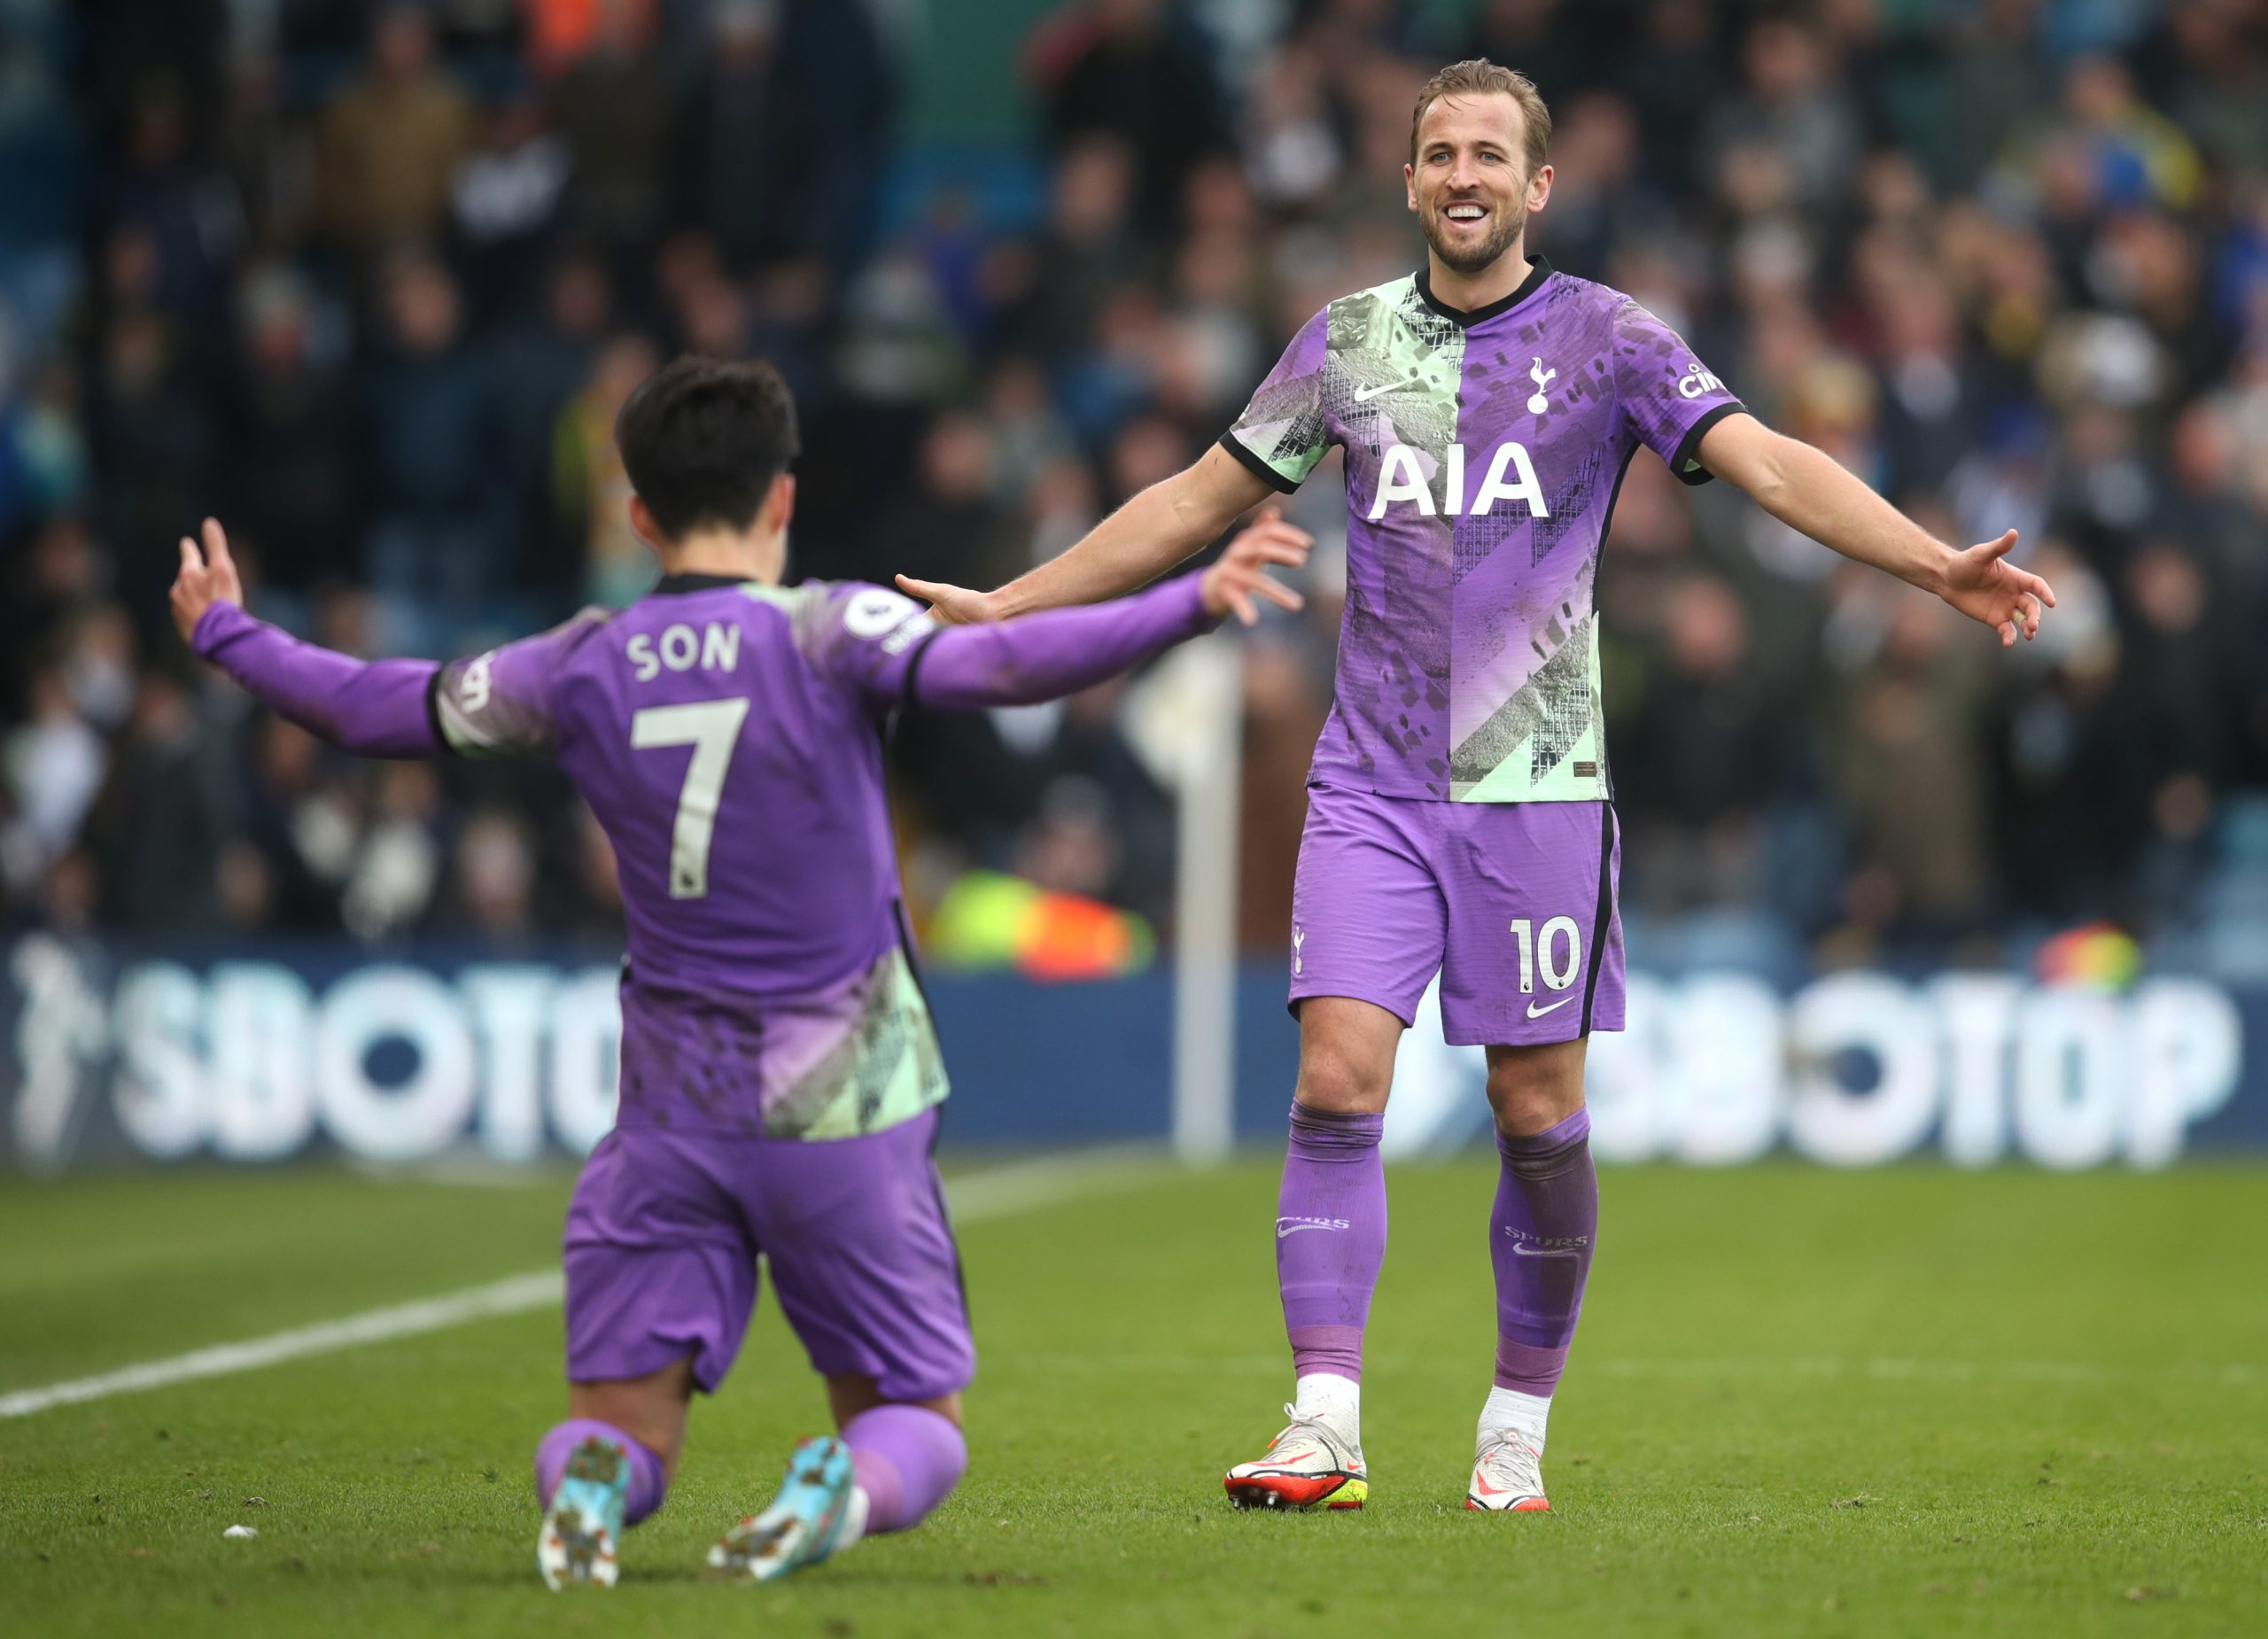 Heung-Min Son celebrates with teammate Harry Kane of Tottenham Hotspur. (Photo by Chris Brunskill/Getty Images)